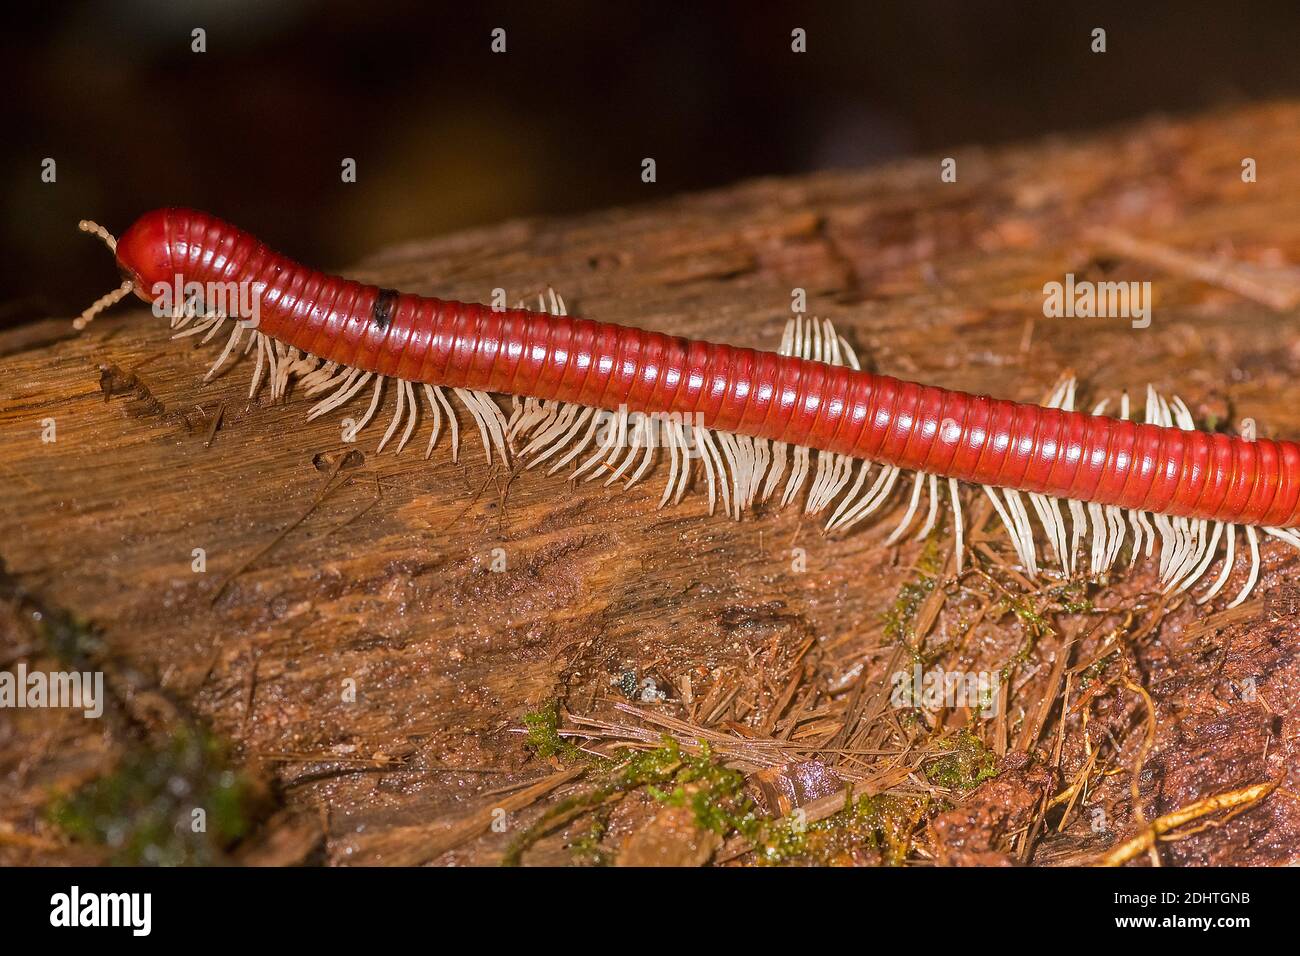 Giant millipede (about 20 cm long, possibly Trigoniulus sp.) from Gunung Gading National Park, Sarawak, Borneo. Stock Photo